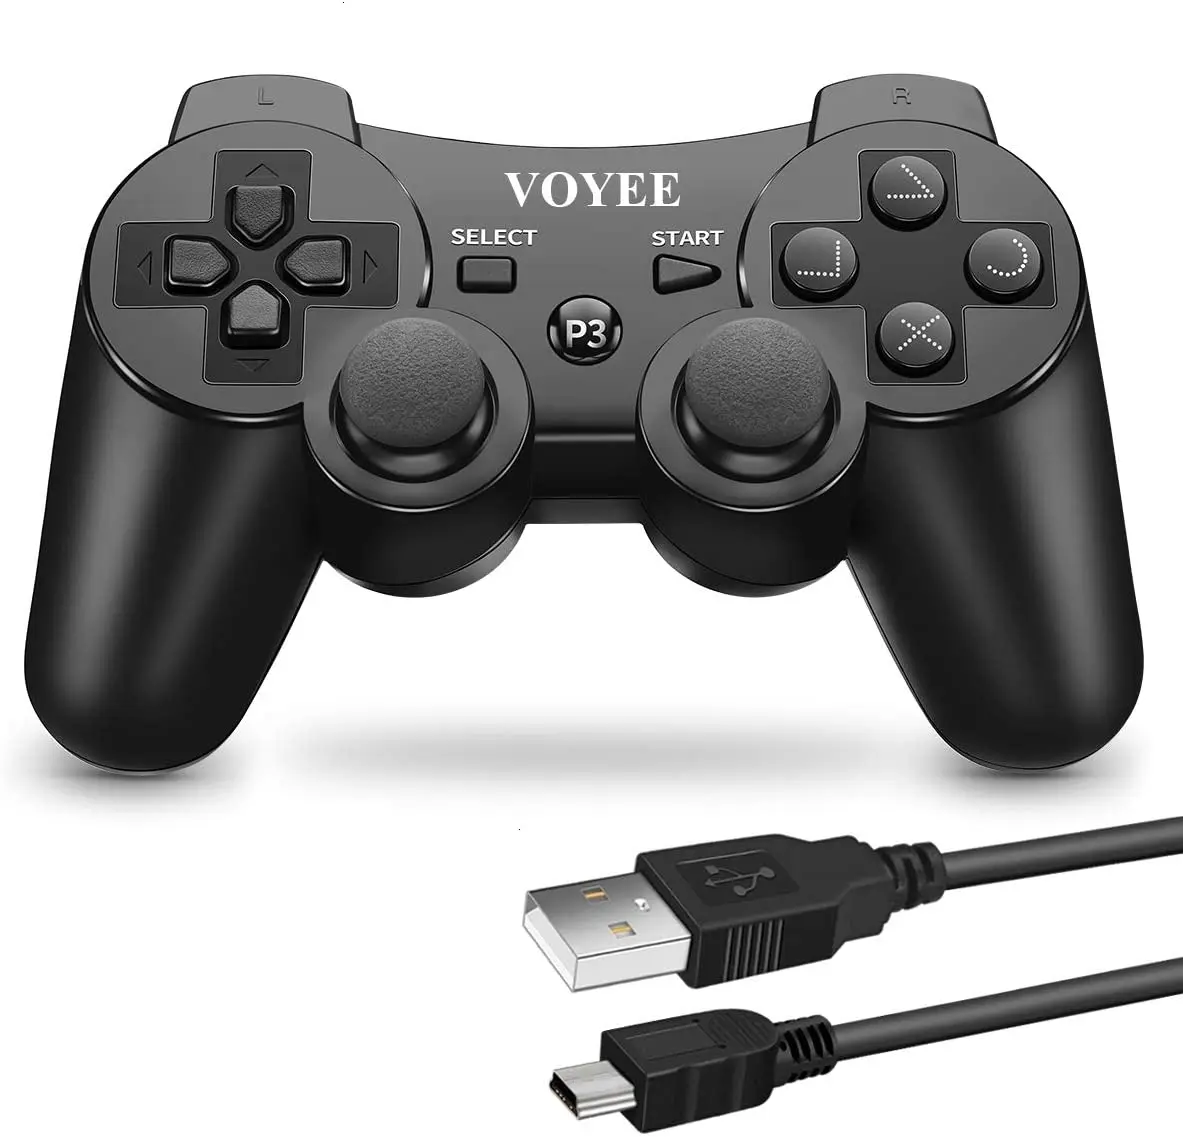 

PS3 Controller Wireless Remote Gamepad with Upgraded Joystick for Sony Playstation 3, Black